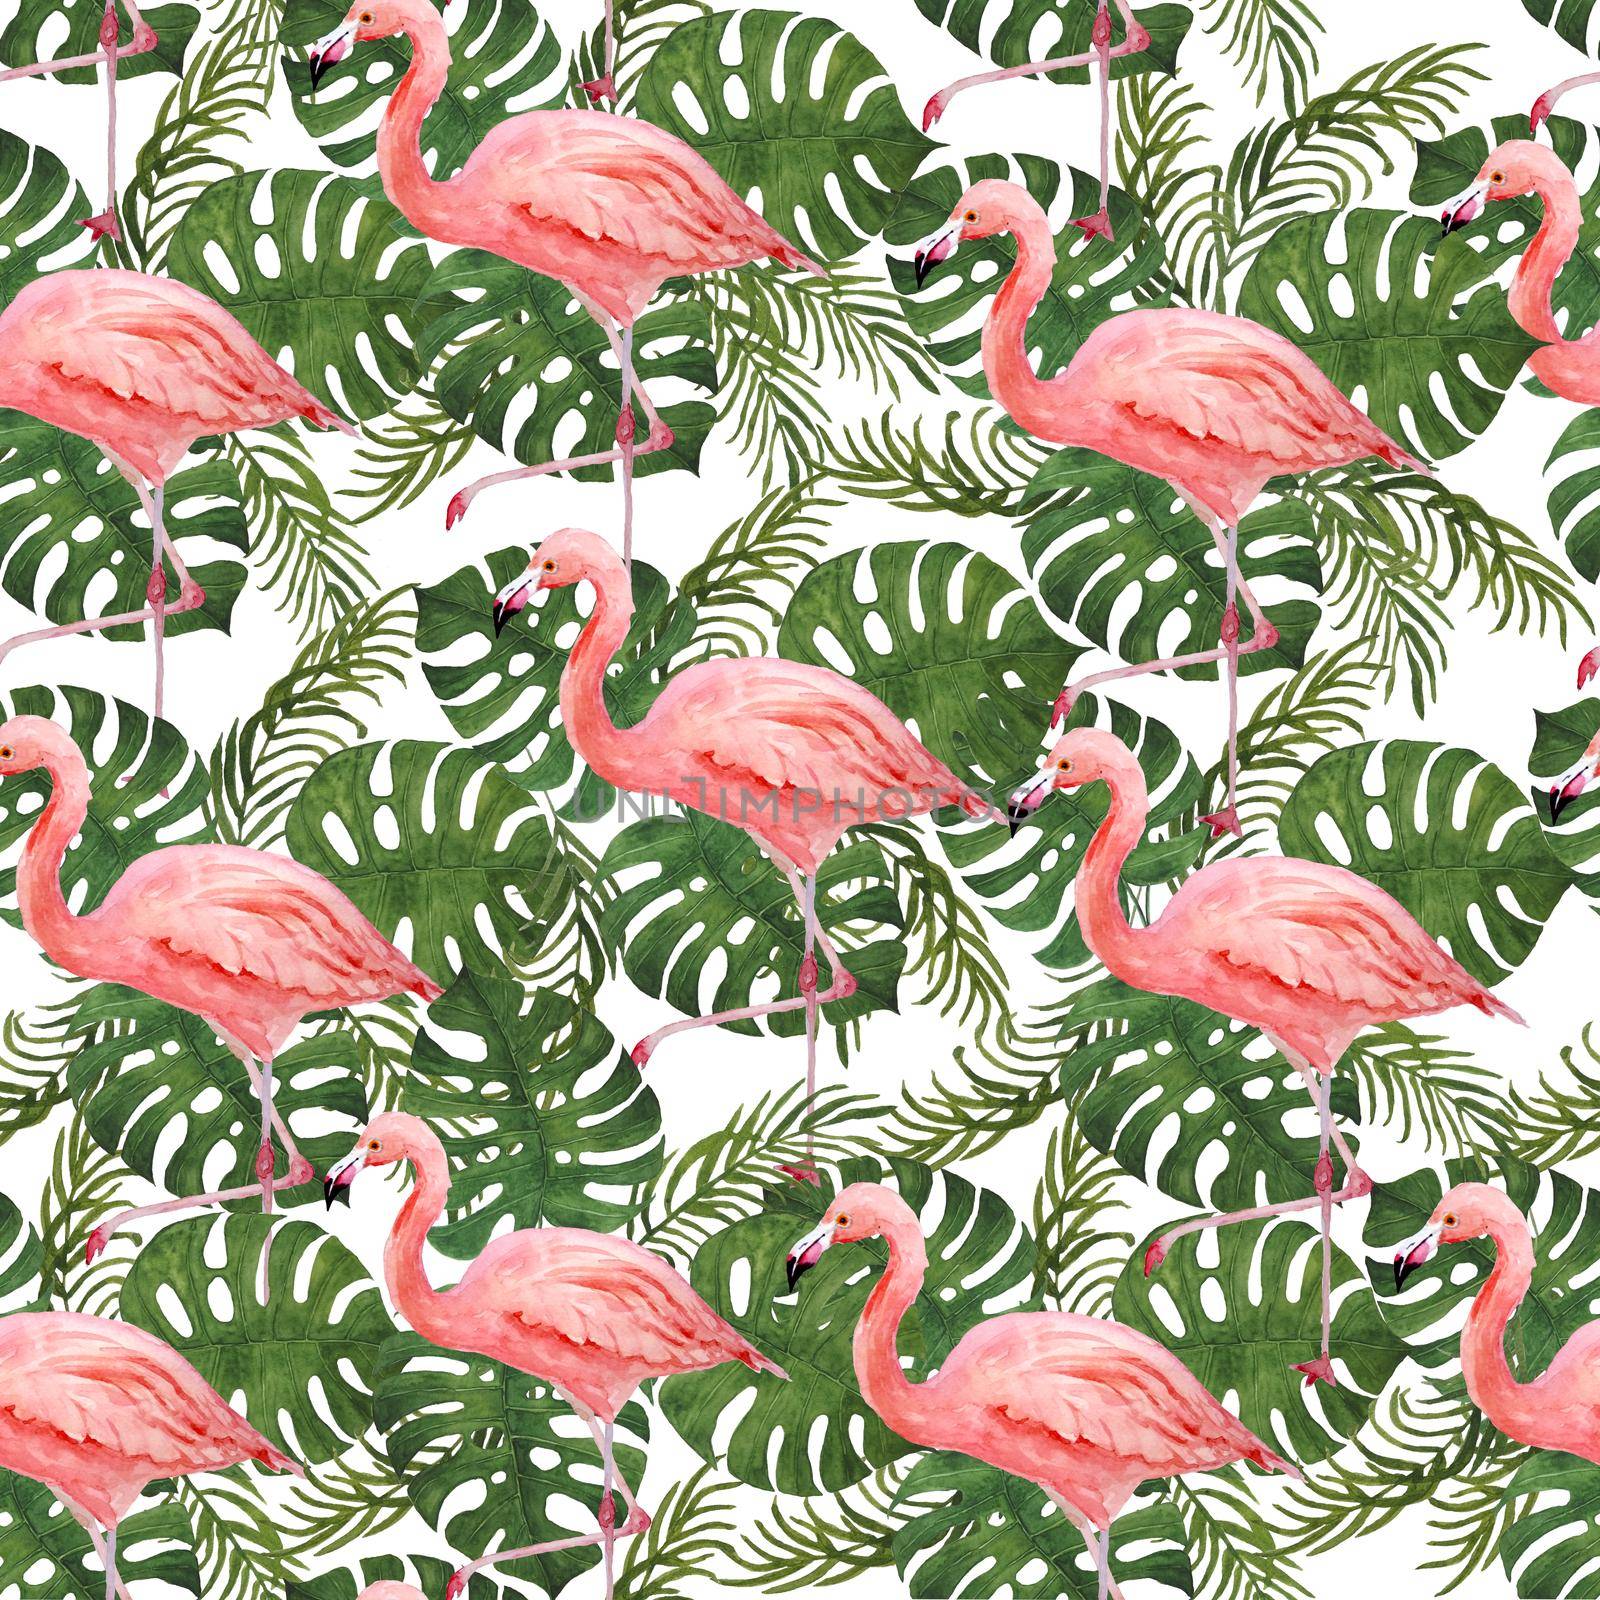 Watercolor hand drawn seamless pattern pink flamingo bird and tropical green monstera palm jungle leaves on background. Summer vacation holiday concept. Print for card invitation t-shirt decor textile